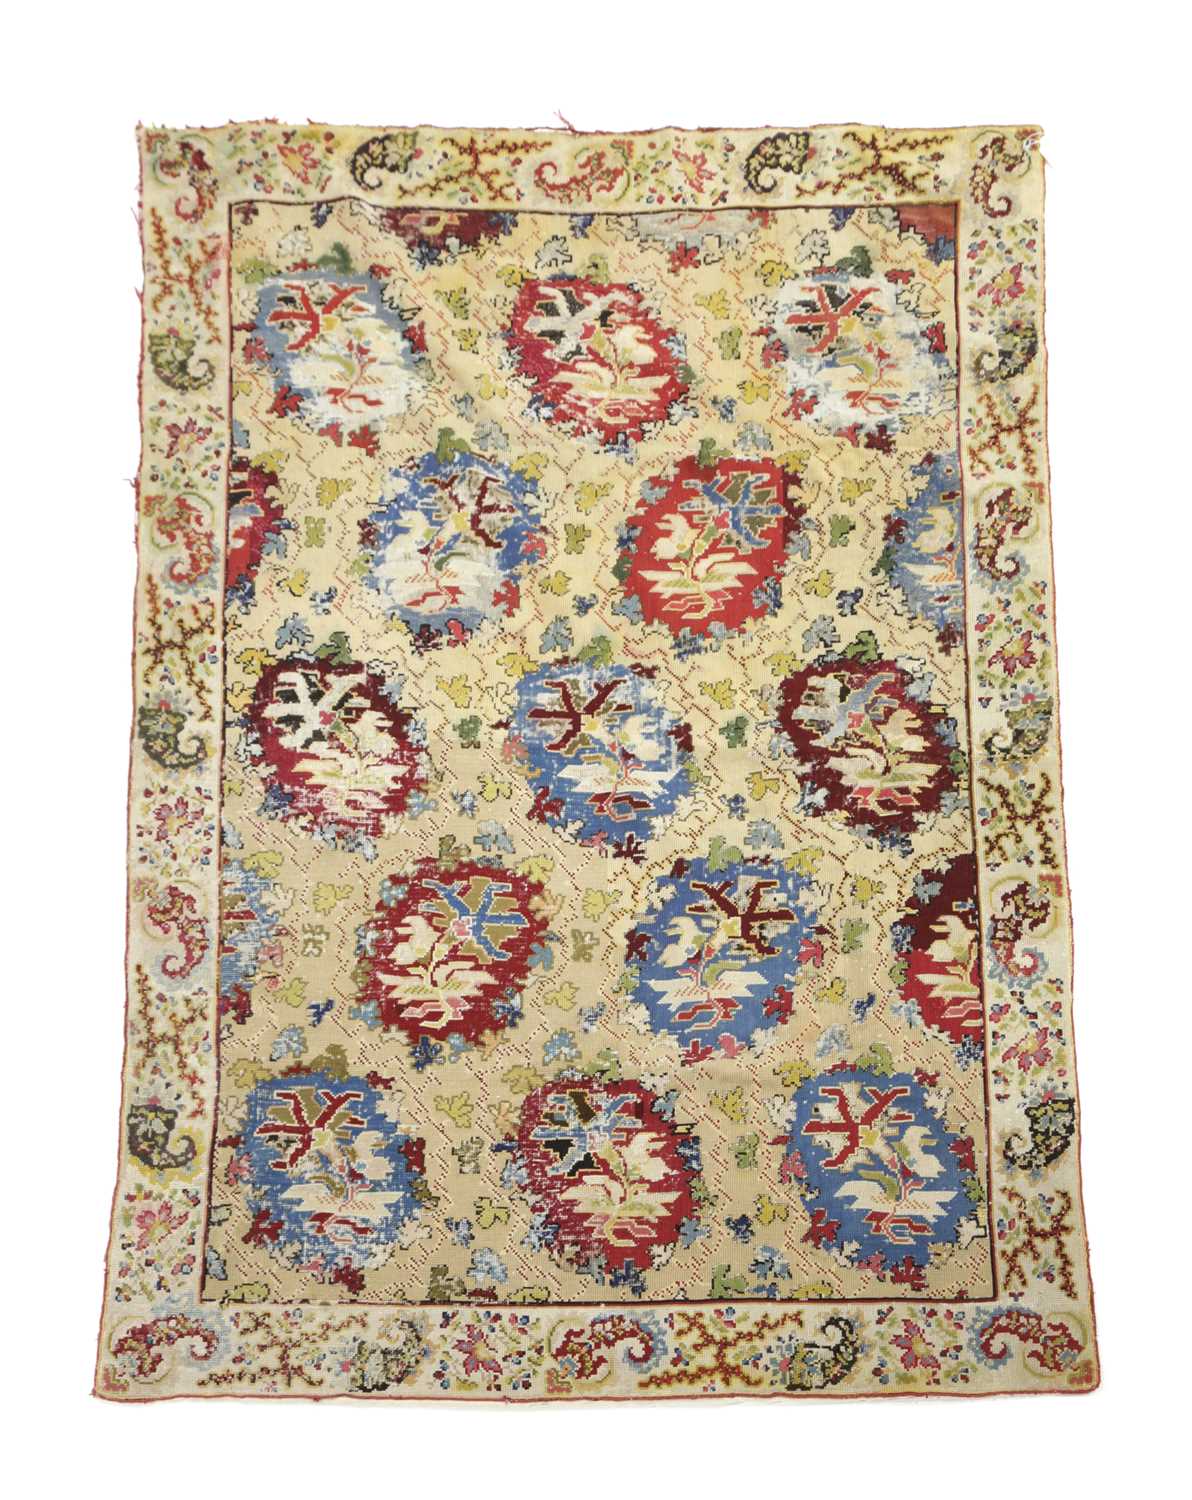 A EUROPEAN NEEDLEPOINT RUG C.1900 the pale wheat field with polychrome rondels enclosed by floral